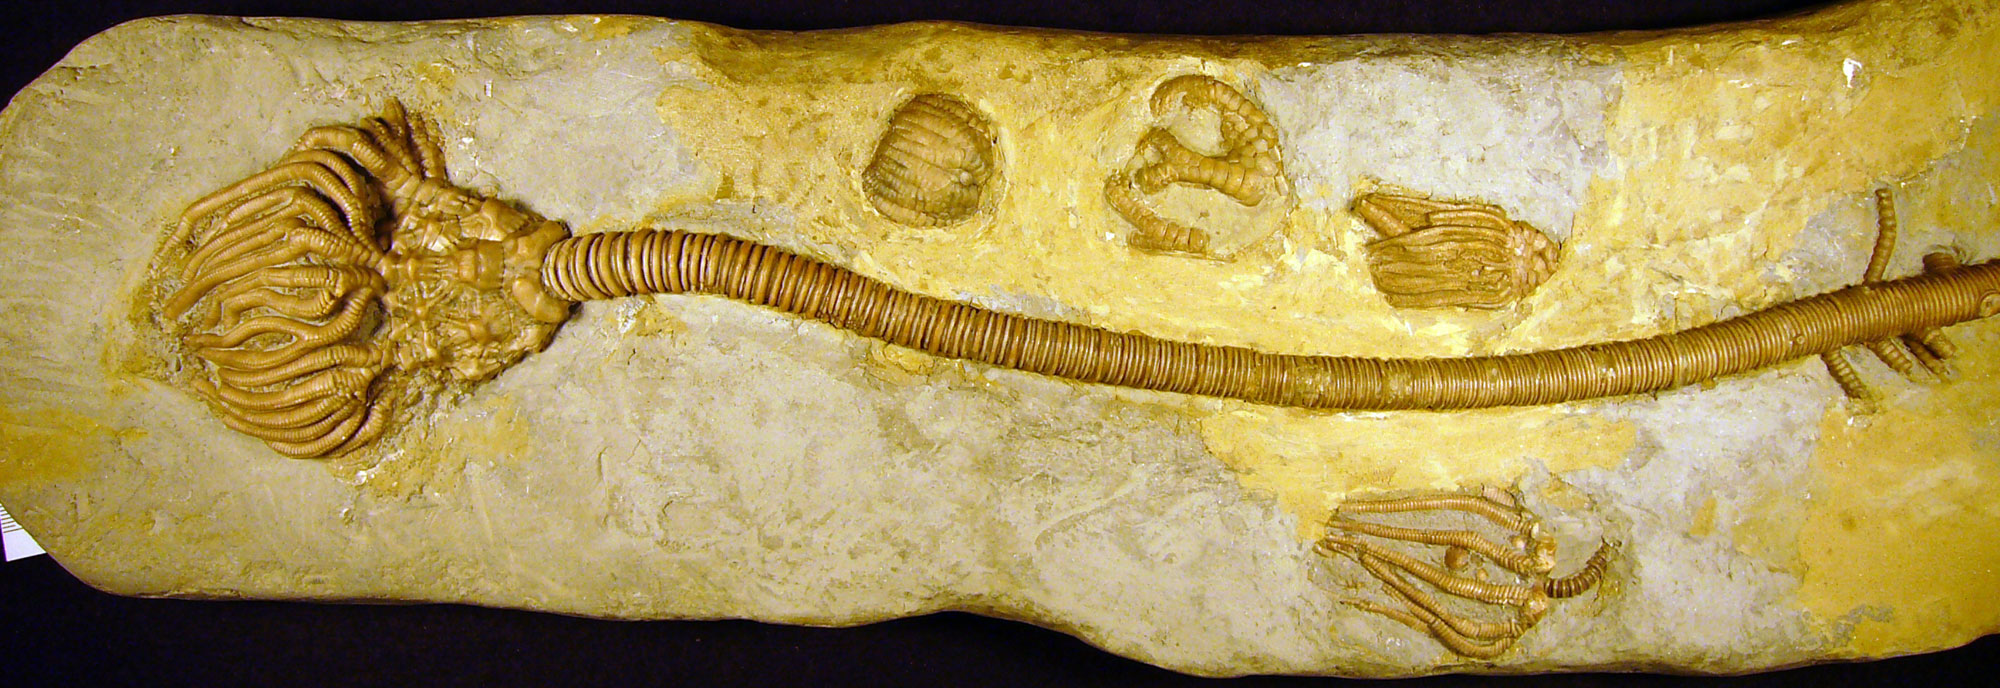 Photograph of a crinoid exposed on the surface fo a rock. The photo shows a beige to yellow rock with a single large crinoid laying horizontally on its surface, with arms to the left and stalk to the right. Arms and calices of four other smaller crinoids also occur on the slab.